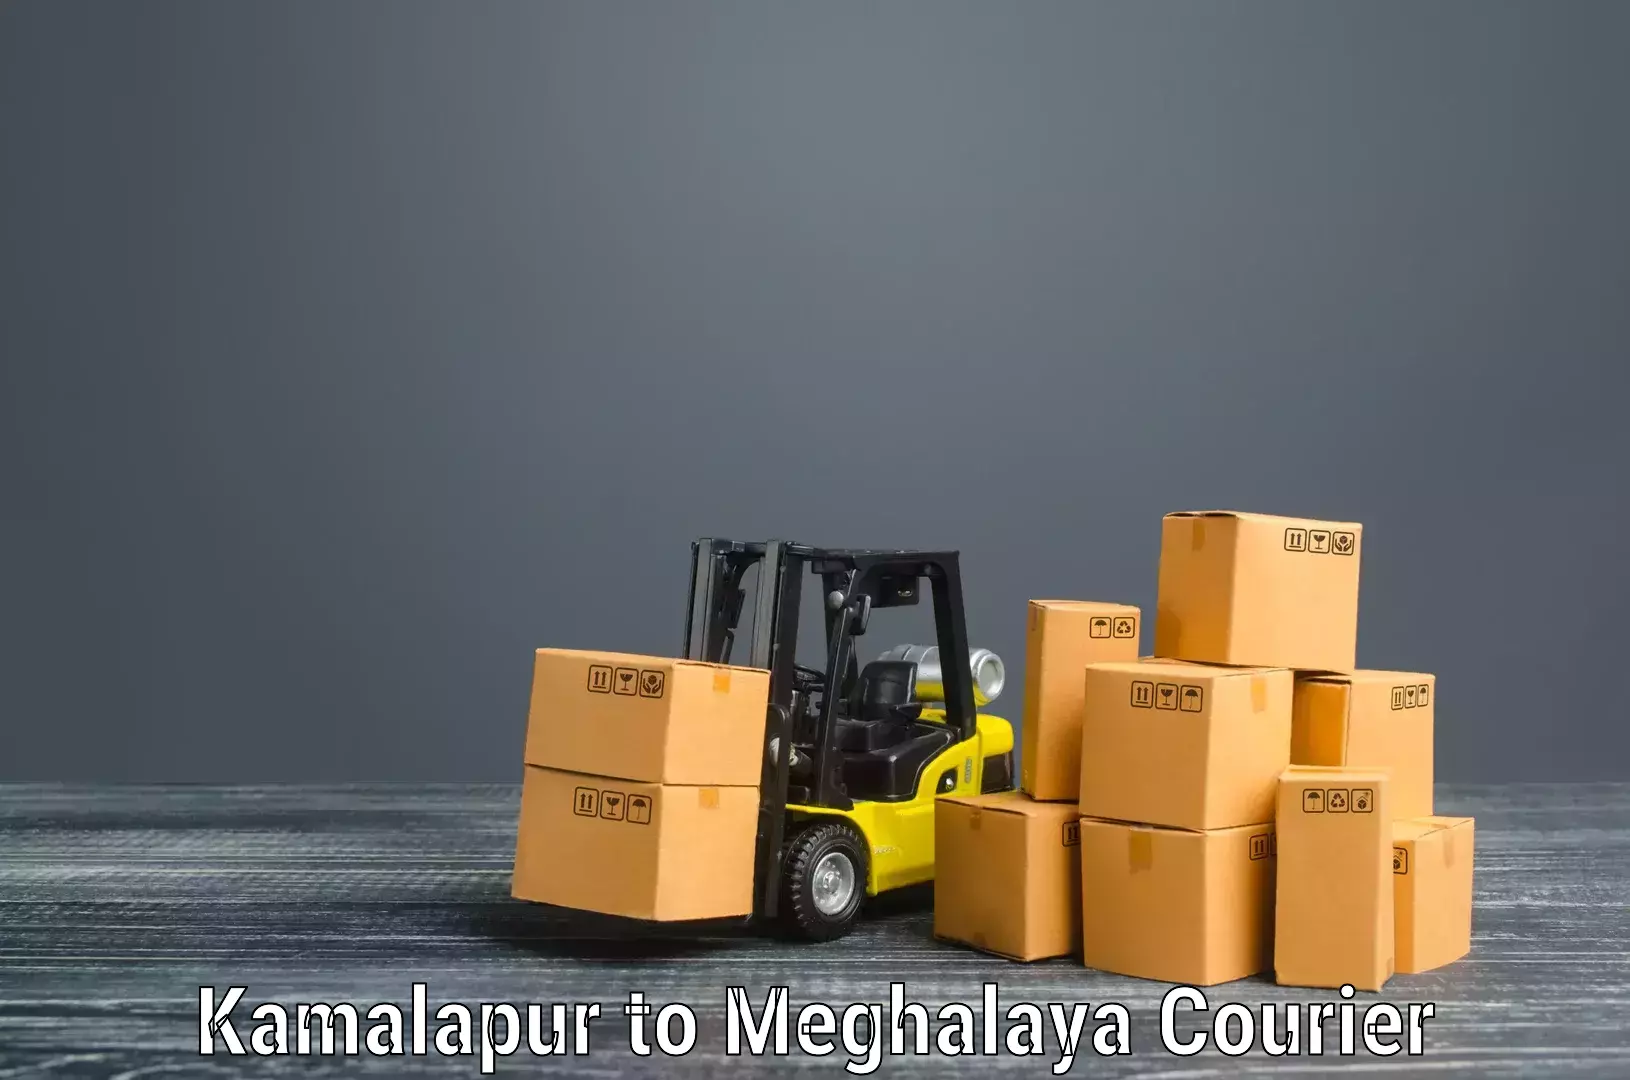 Reliable relocation services Kamalapur to Shillong